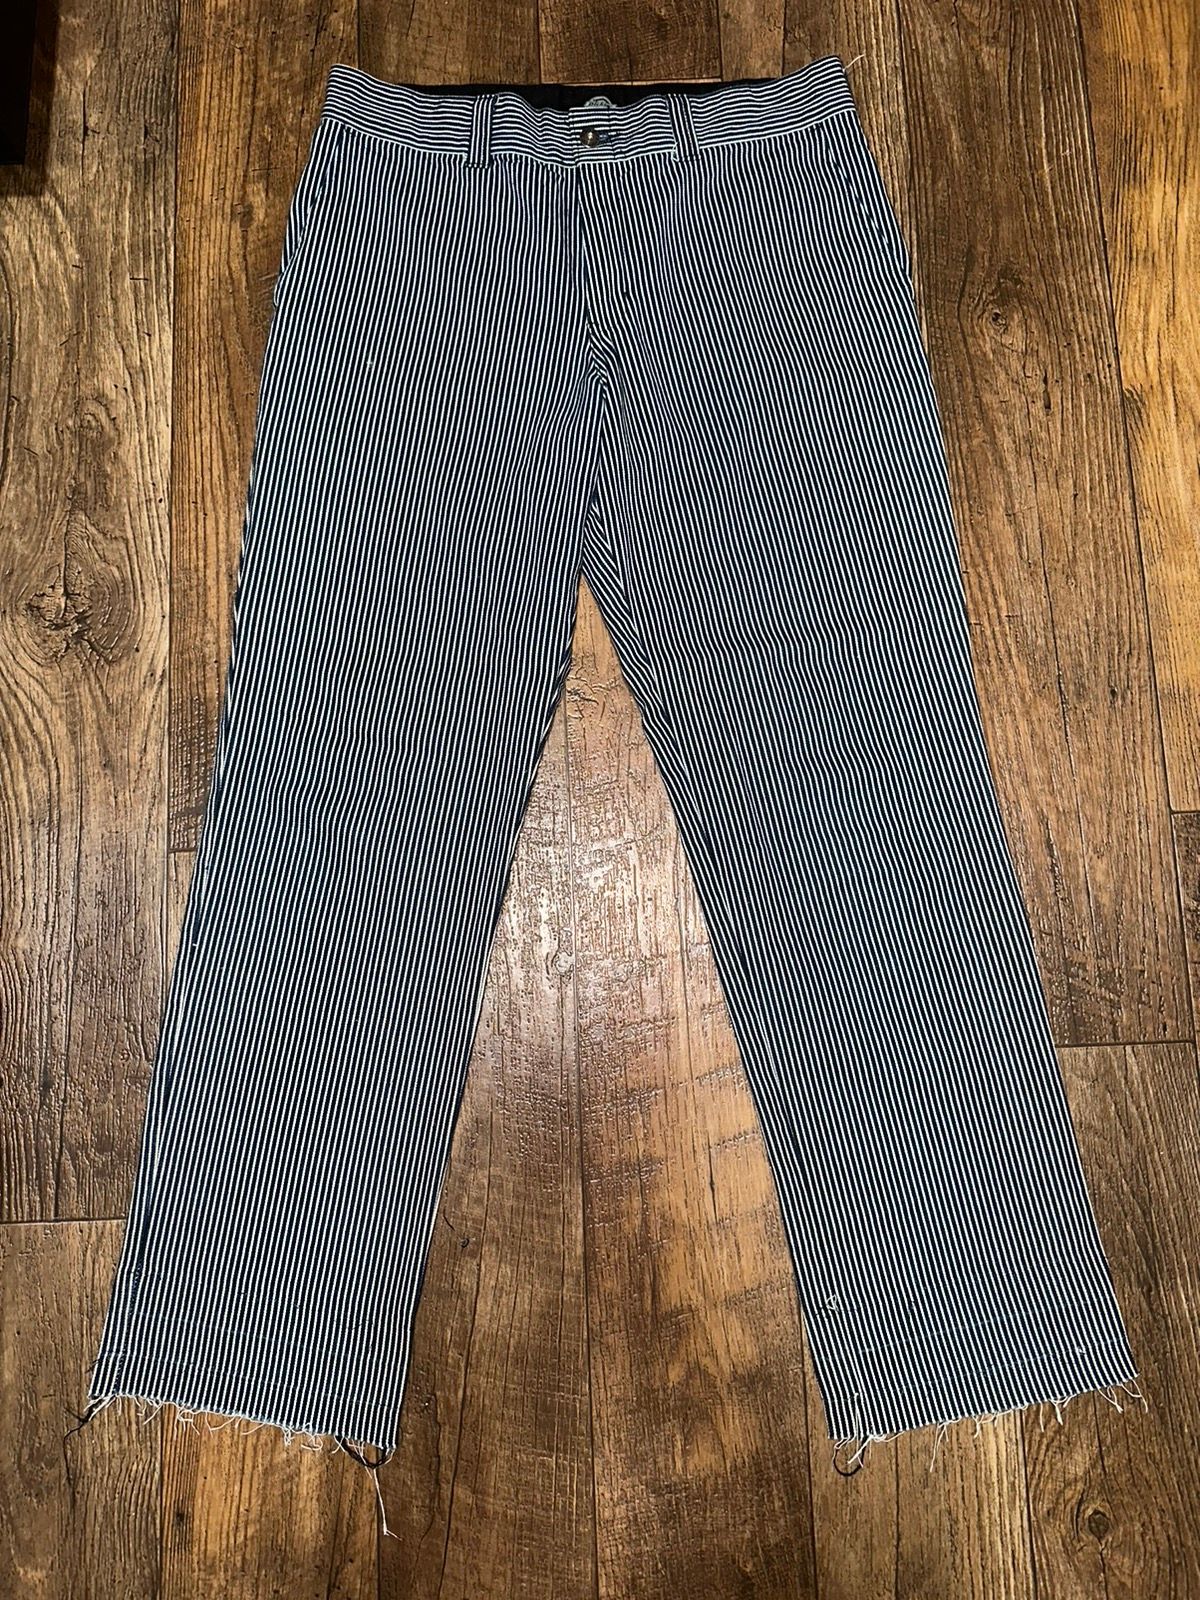 Vintage Hickory Striped Dickies Pants | Grailed